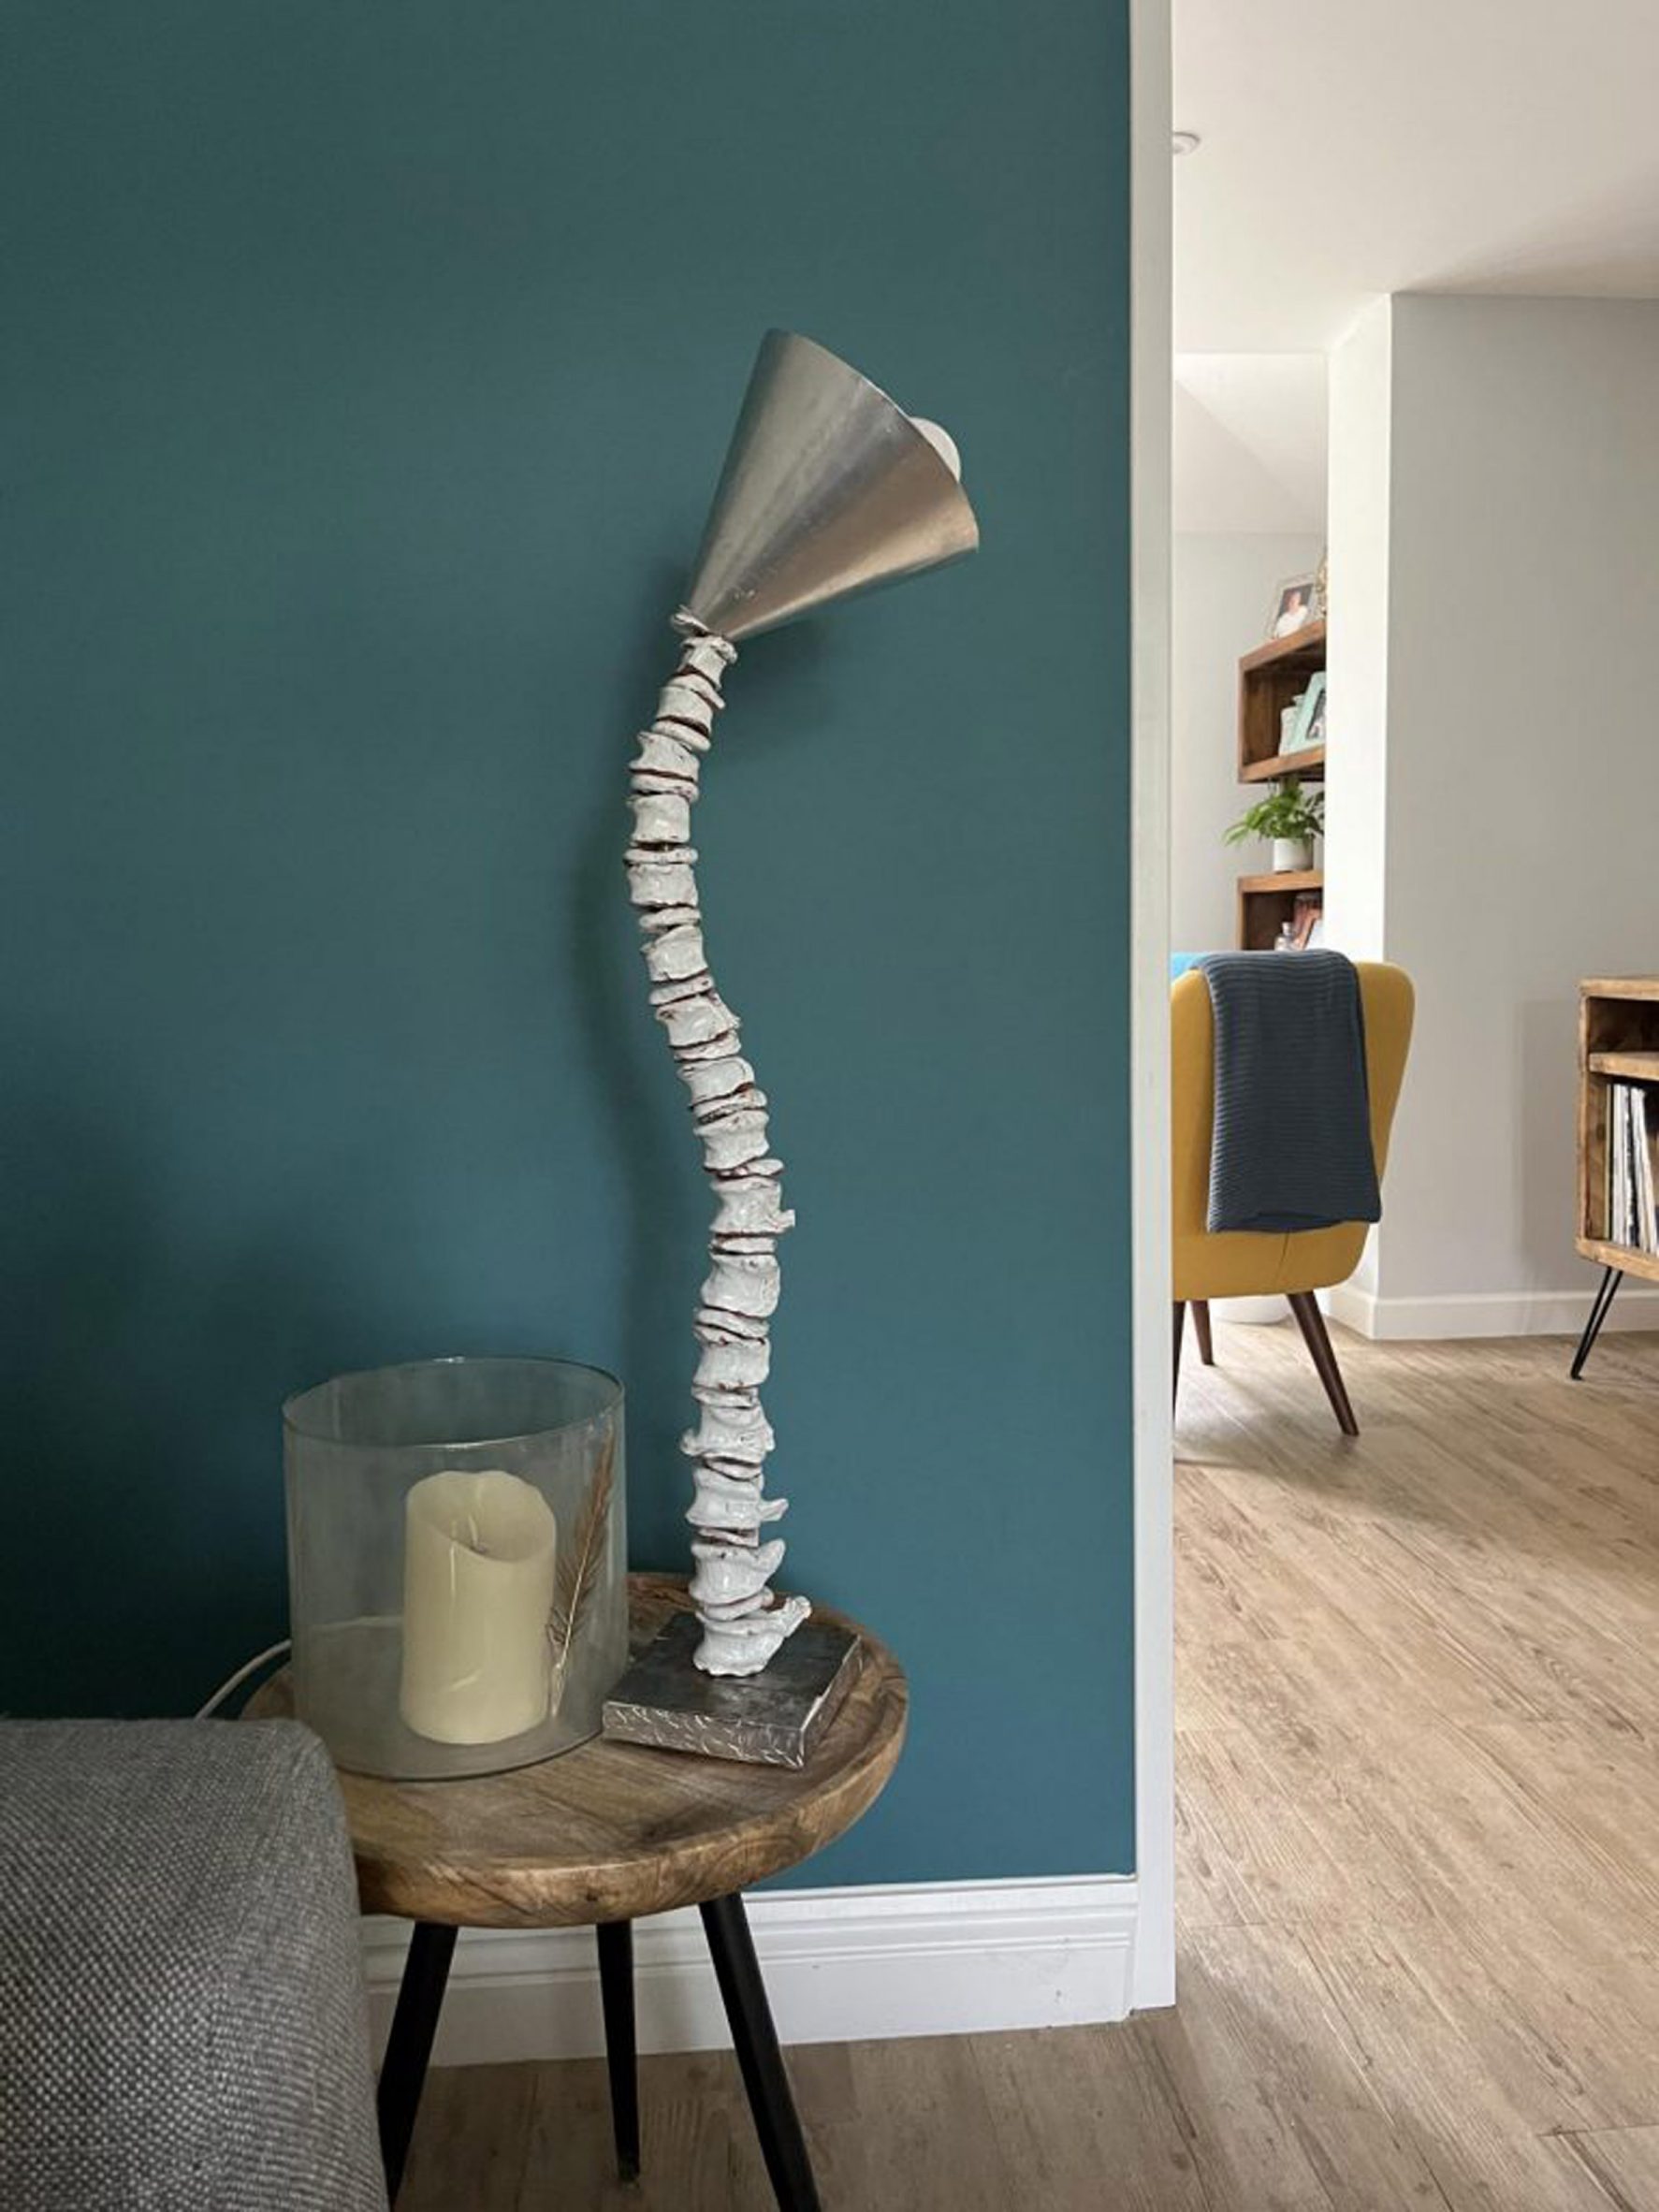 Home interior with spine-shaped lamp on the side table